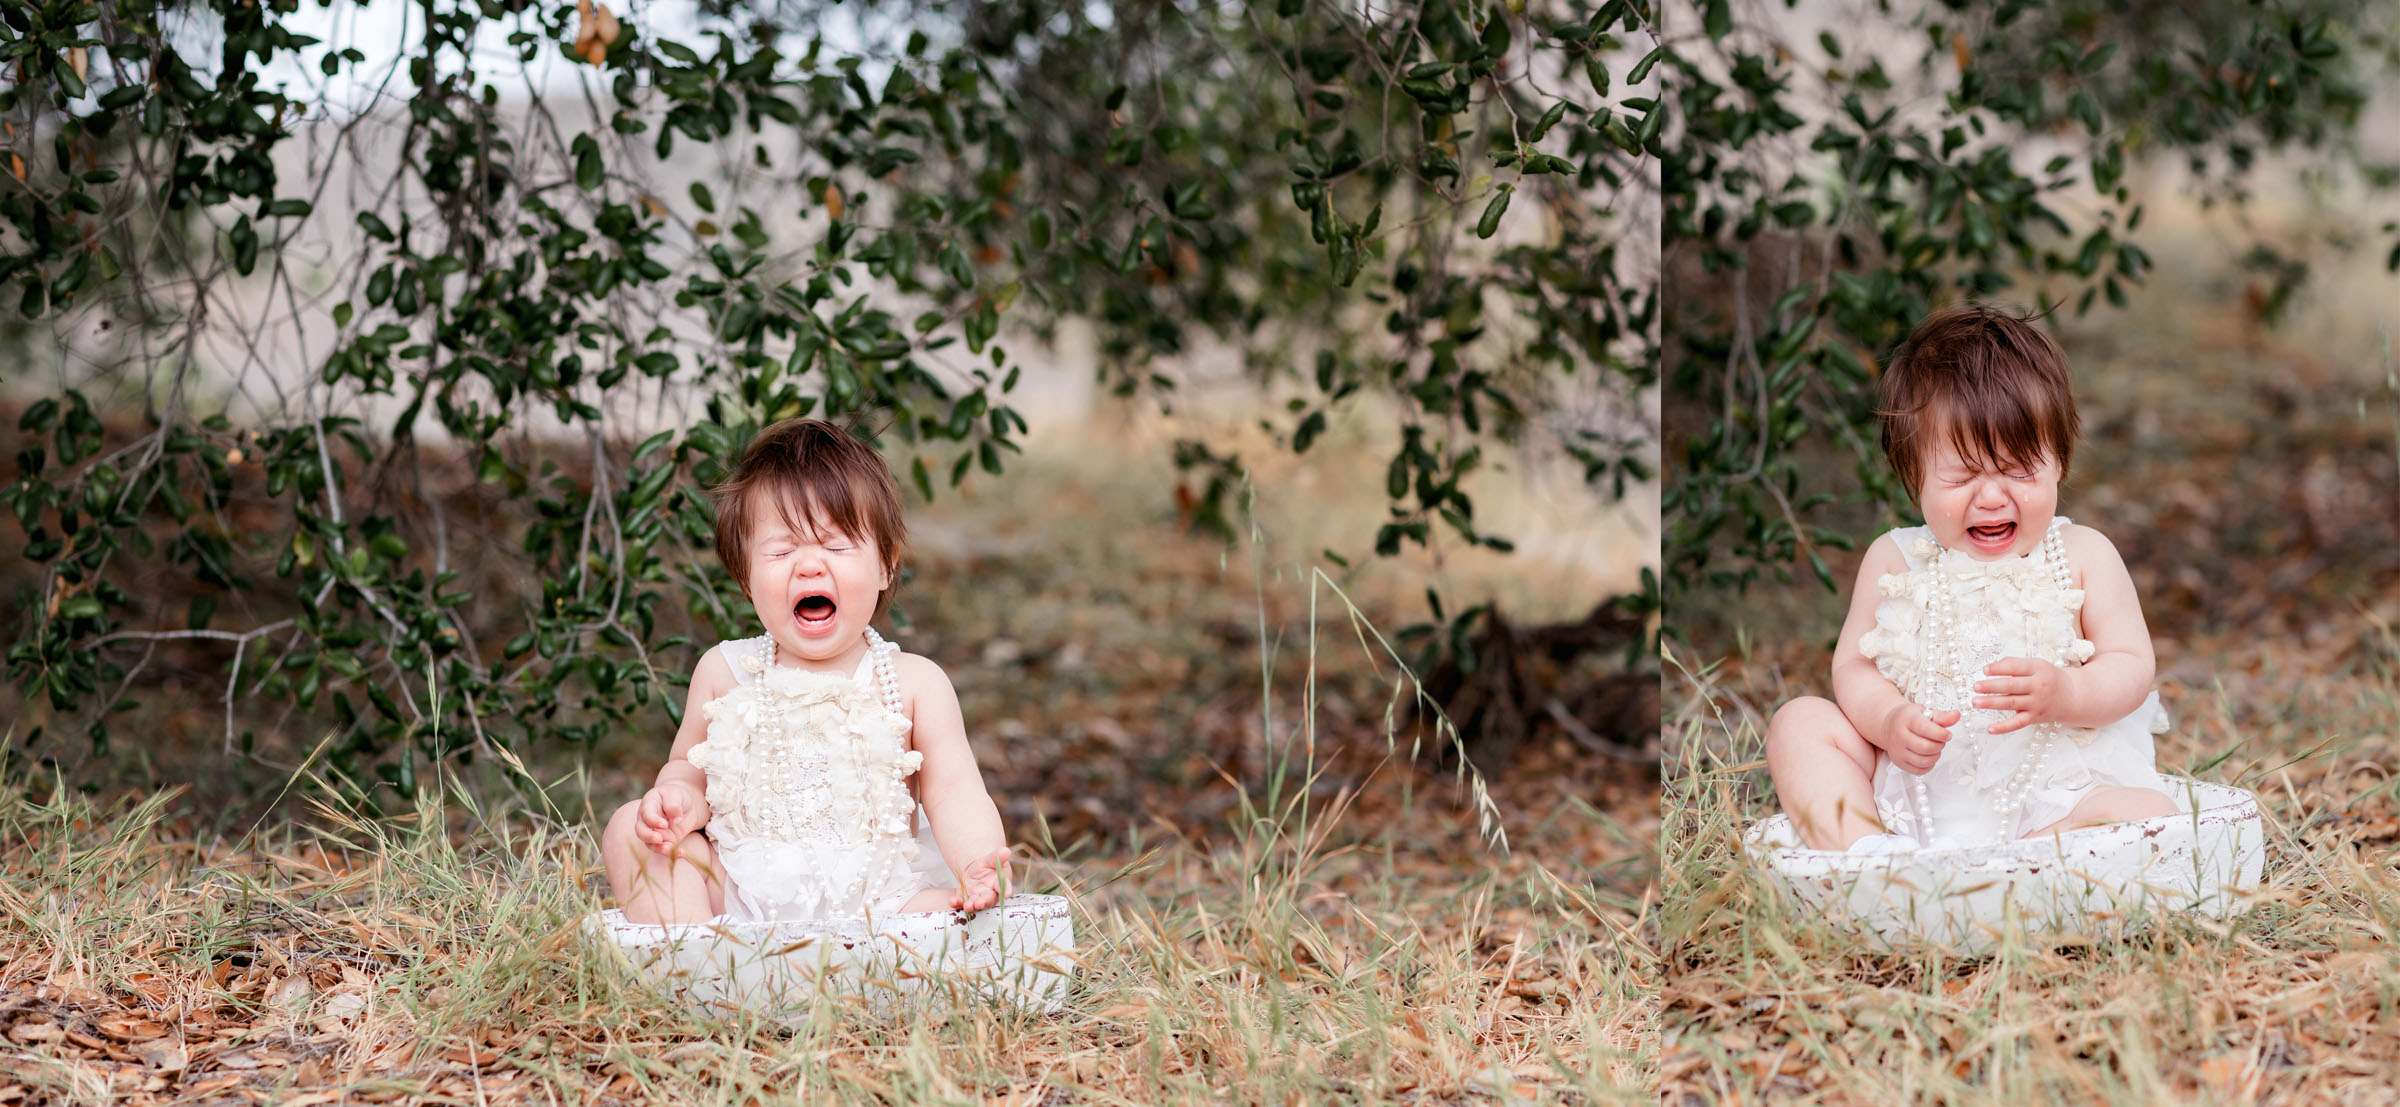 Pictures of baby crying during Mission Trails Outdoor Cake Smash Pictures by San Diego Kids Photographer